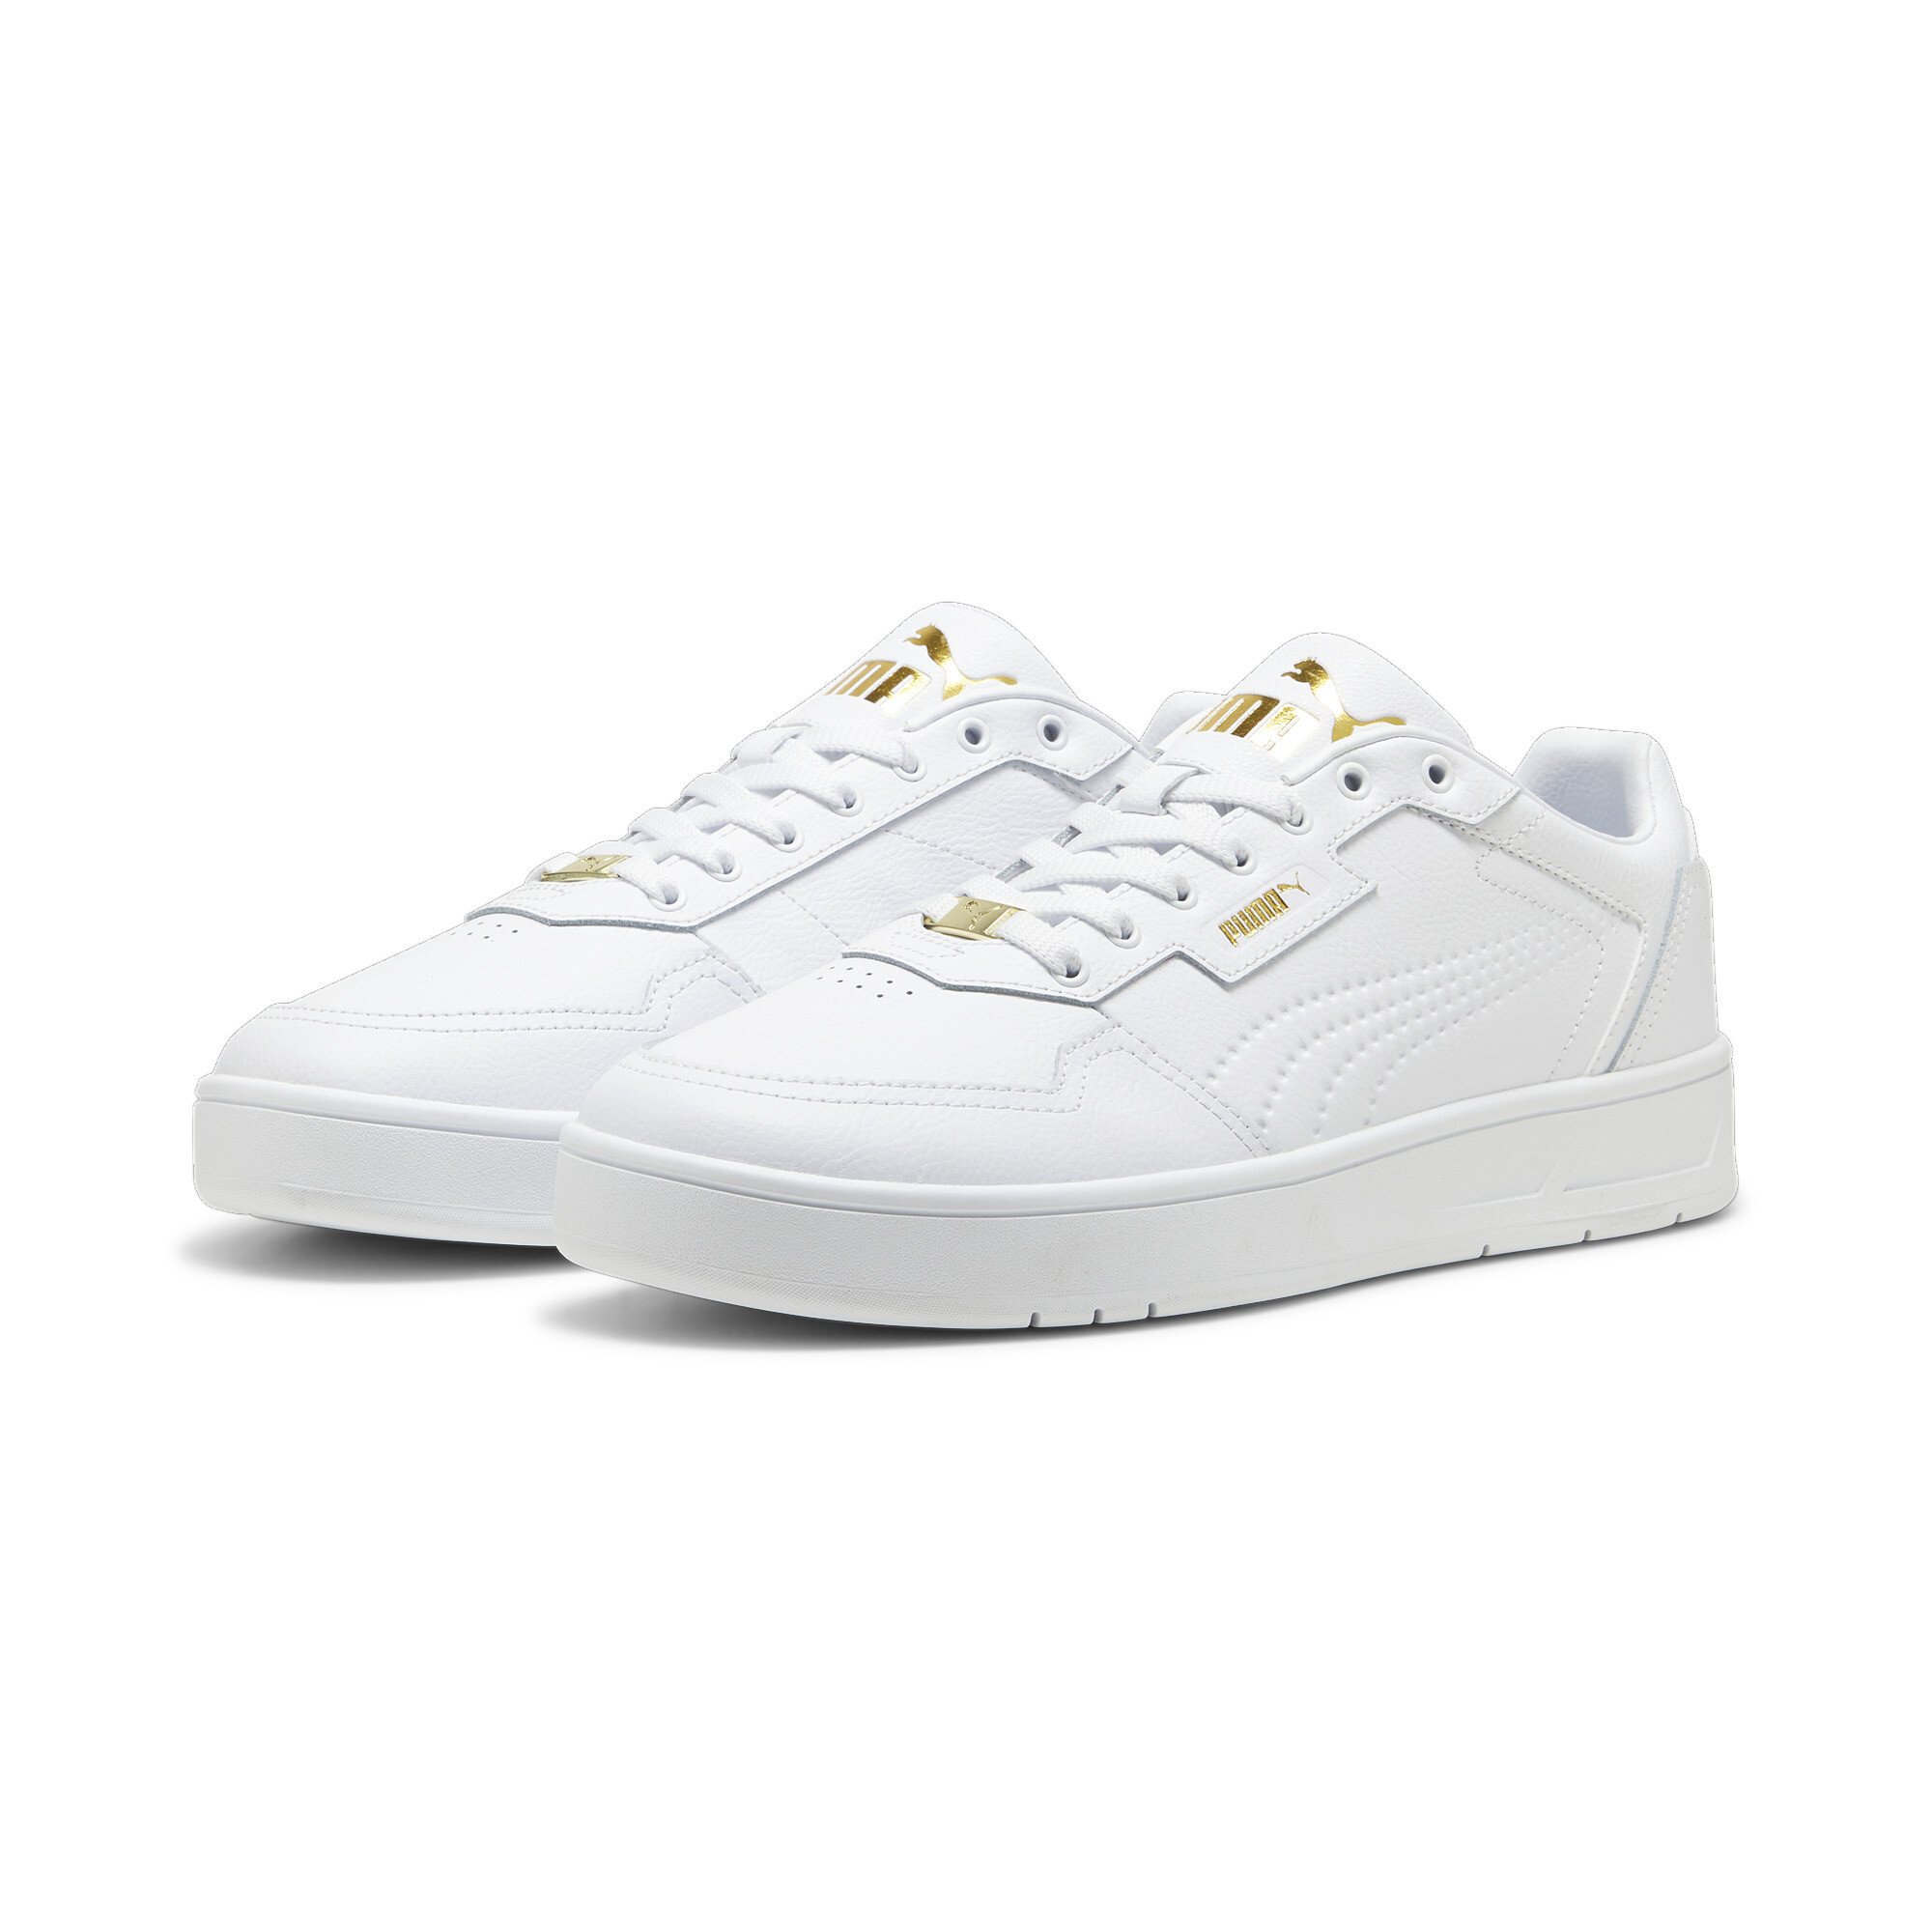 Puma Court Classic Lux Sneakers, White, Size 44.5, Shoes